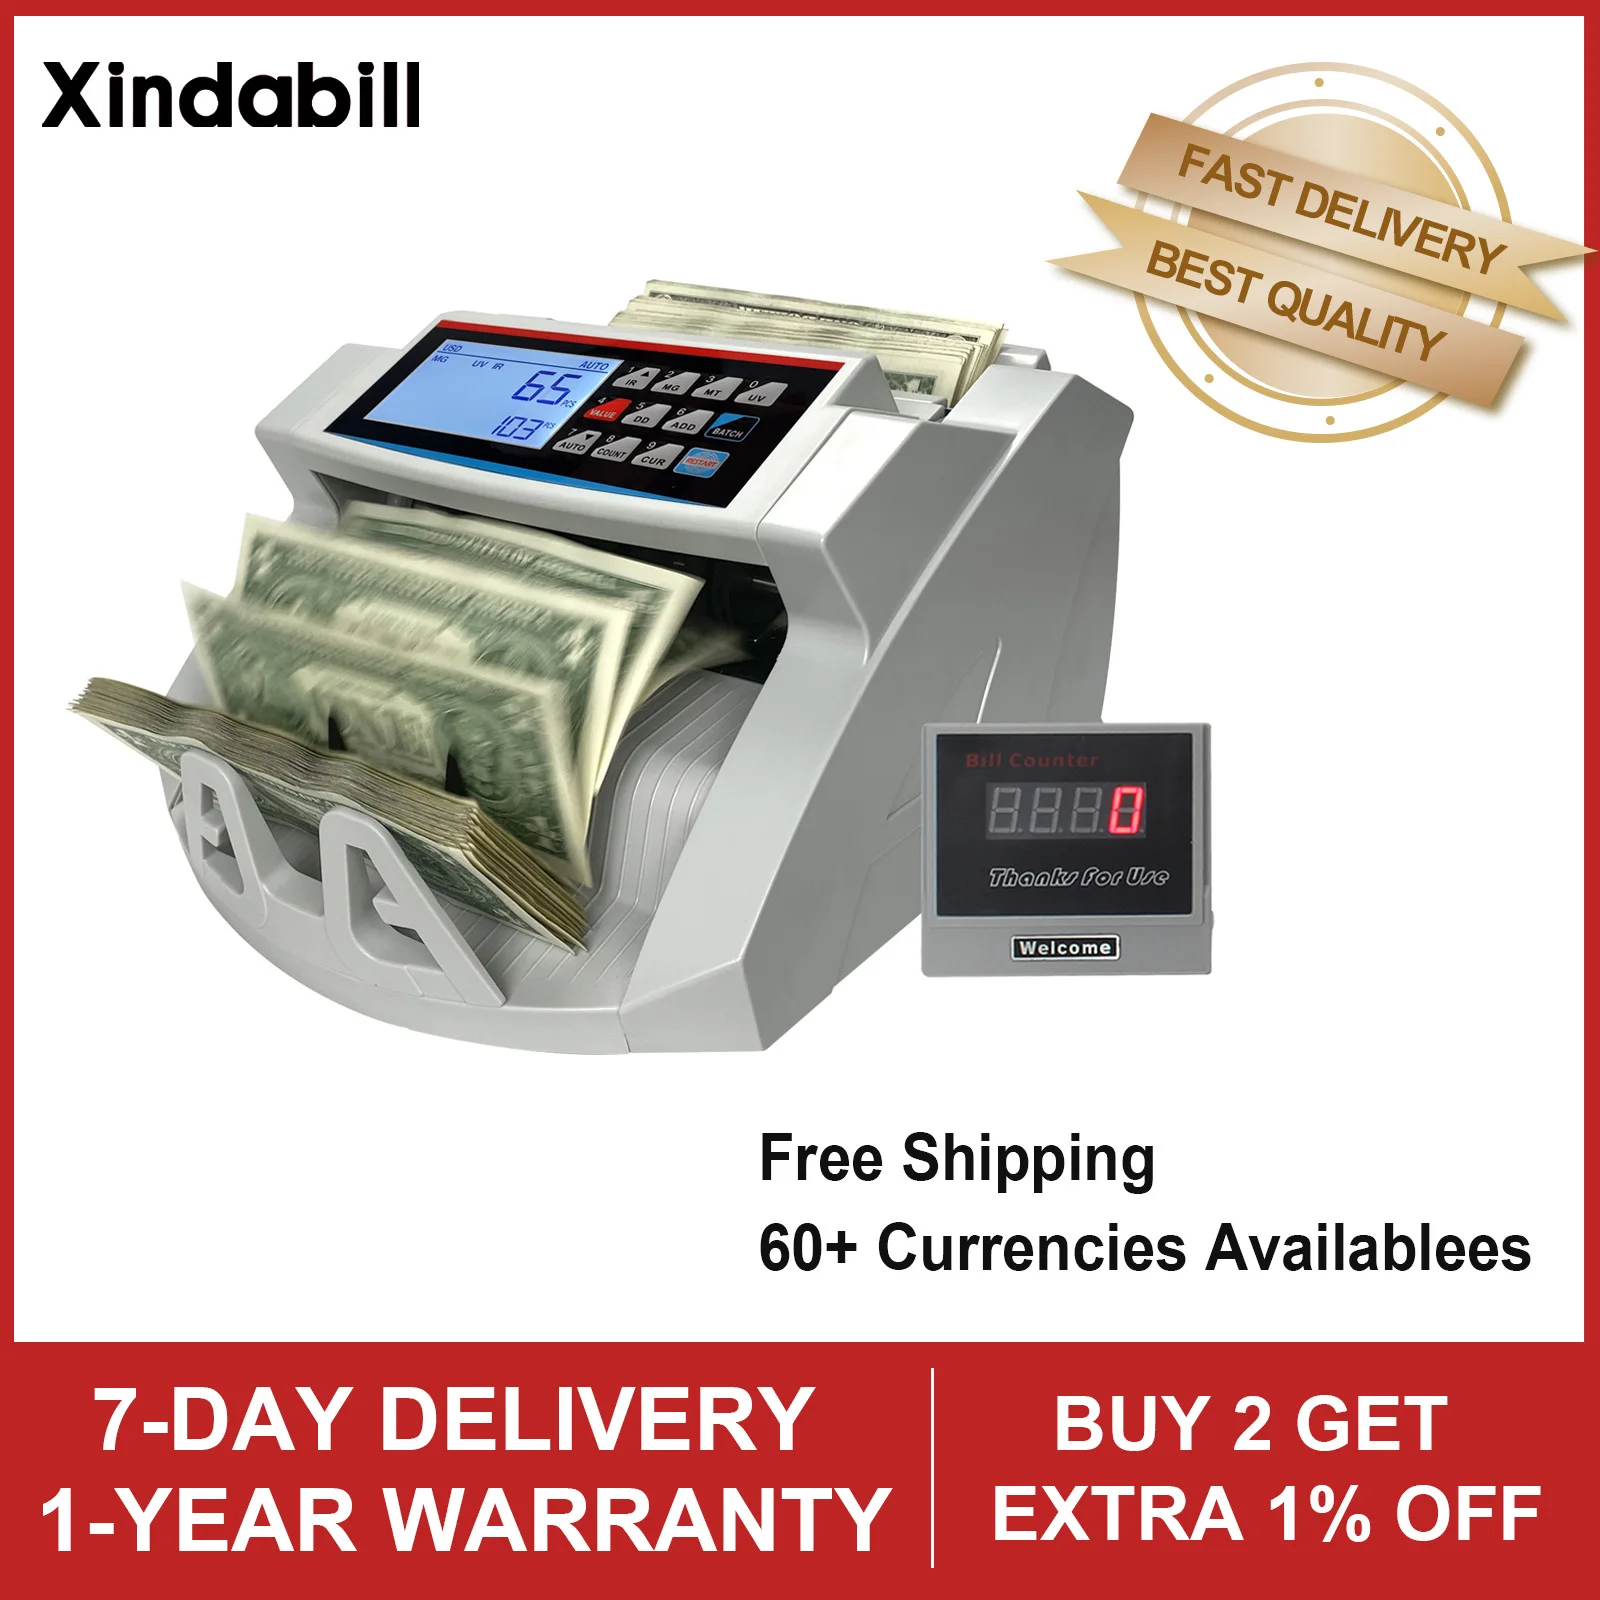 XD-2100 UV MG IR Money Counting Machine Multi-currency Bill Counter Detector with Calculator